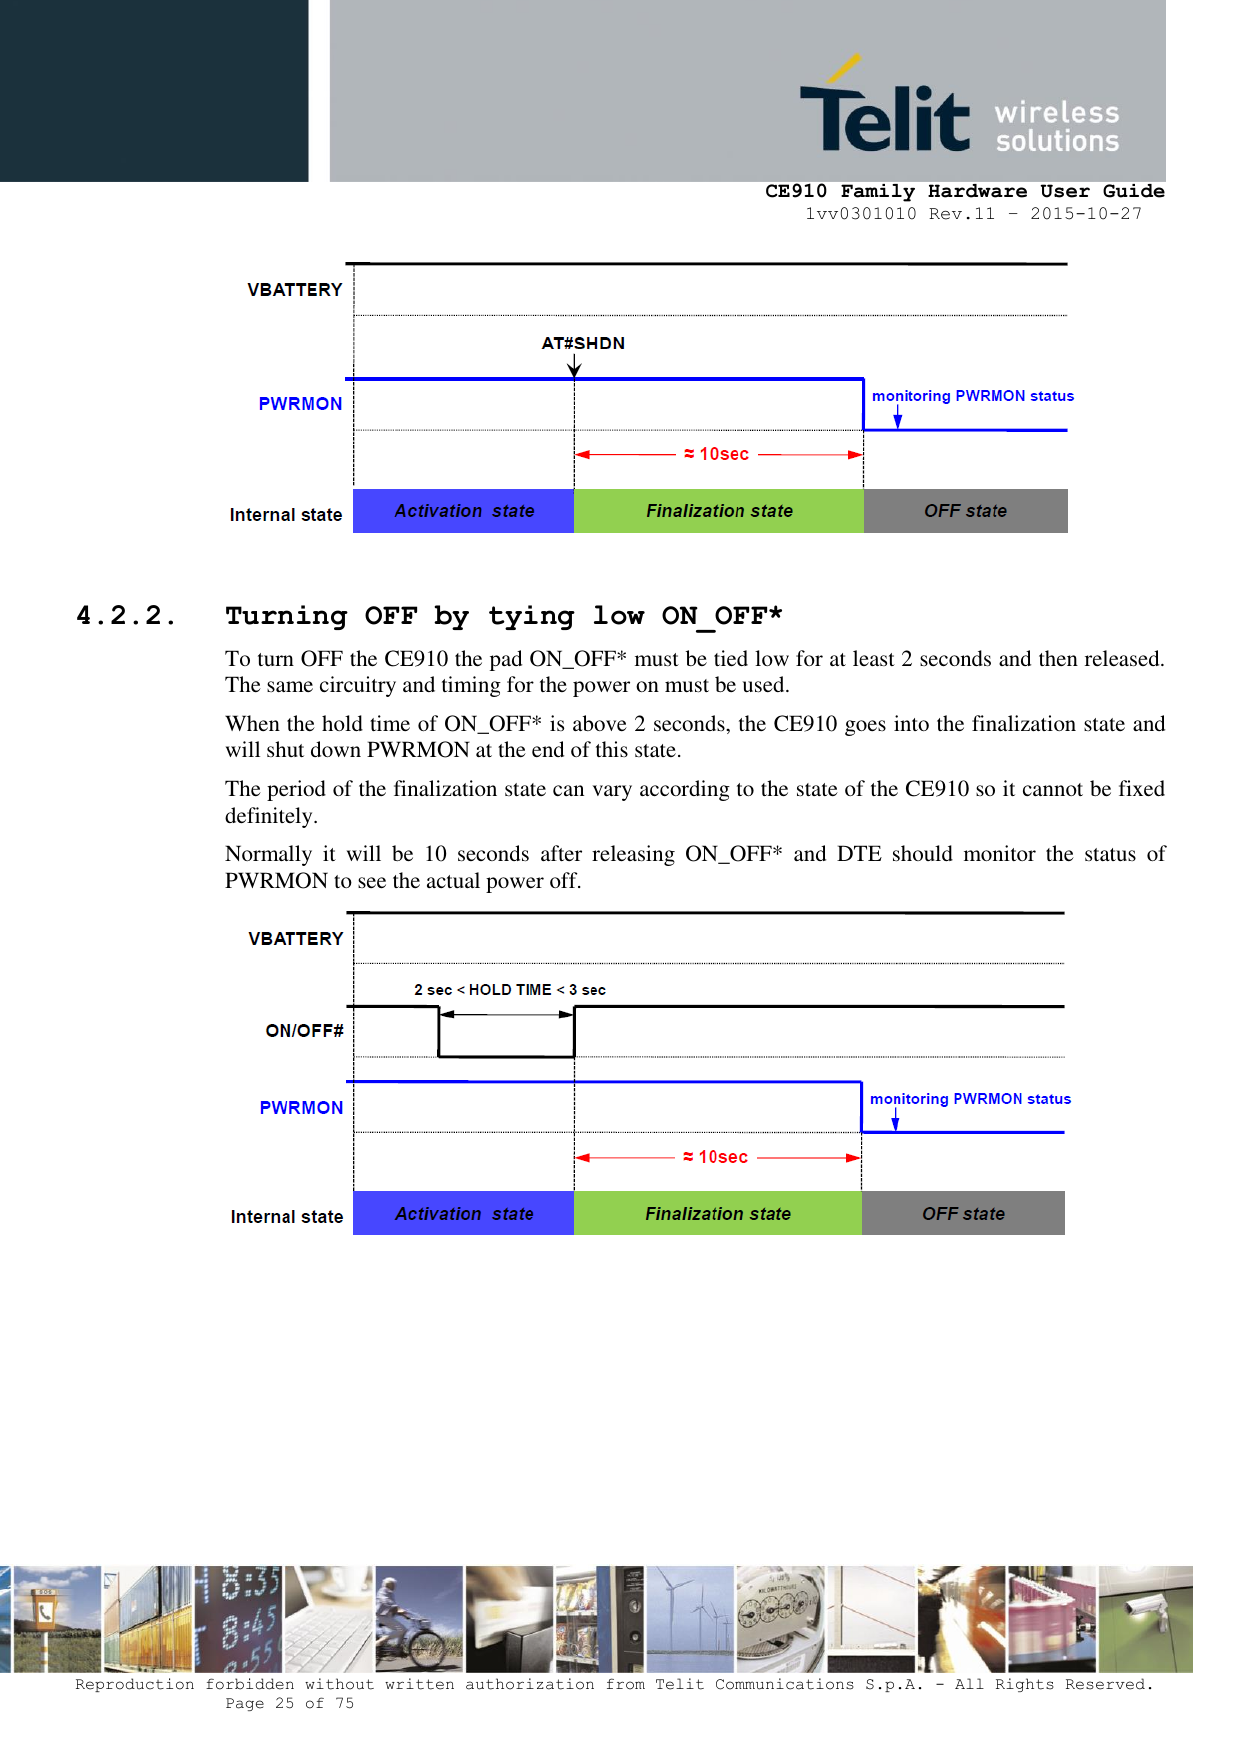     CE910 Family Hardware User Guide 1vv0301010 Rev.11 – 2015-10-27 Reproduction forbidden without written authorization from Telit Communications S.p.A. - All Rights Reserved.    Page 25 of 75                                                       4.2.2. Turning OFF by tying low ON_OFF* To turn OFF the CE910 the pad ON_OFF* must be tied low for at least 2 seconds and then released. The same circuitry and timing for the power on must be used. When the hold time of ON_OFF* is above 2 seconds, the CE910 goes into the finalization state and will shut down PWRMON at the end of this state. The period of the finalization state can vary according to the state of the CE910 so it cannot be fixed definitely. Normally  it  will  be  10  seconds  after  releasing  ON_OFF*  and  DTE  should  monitor  the  status  of PWRMON to see the actual power off.        